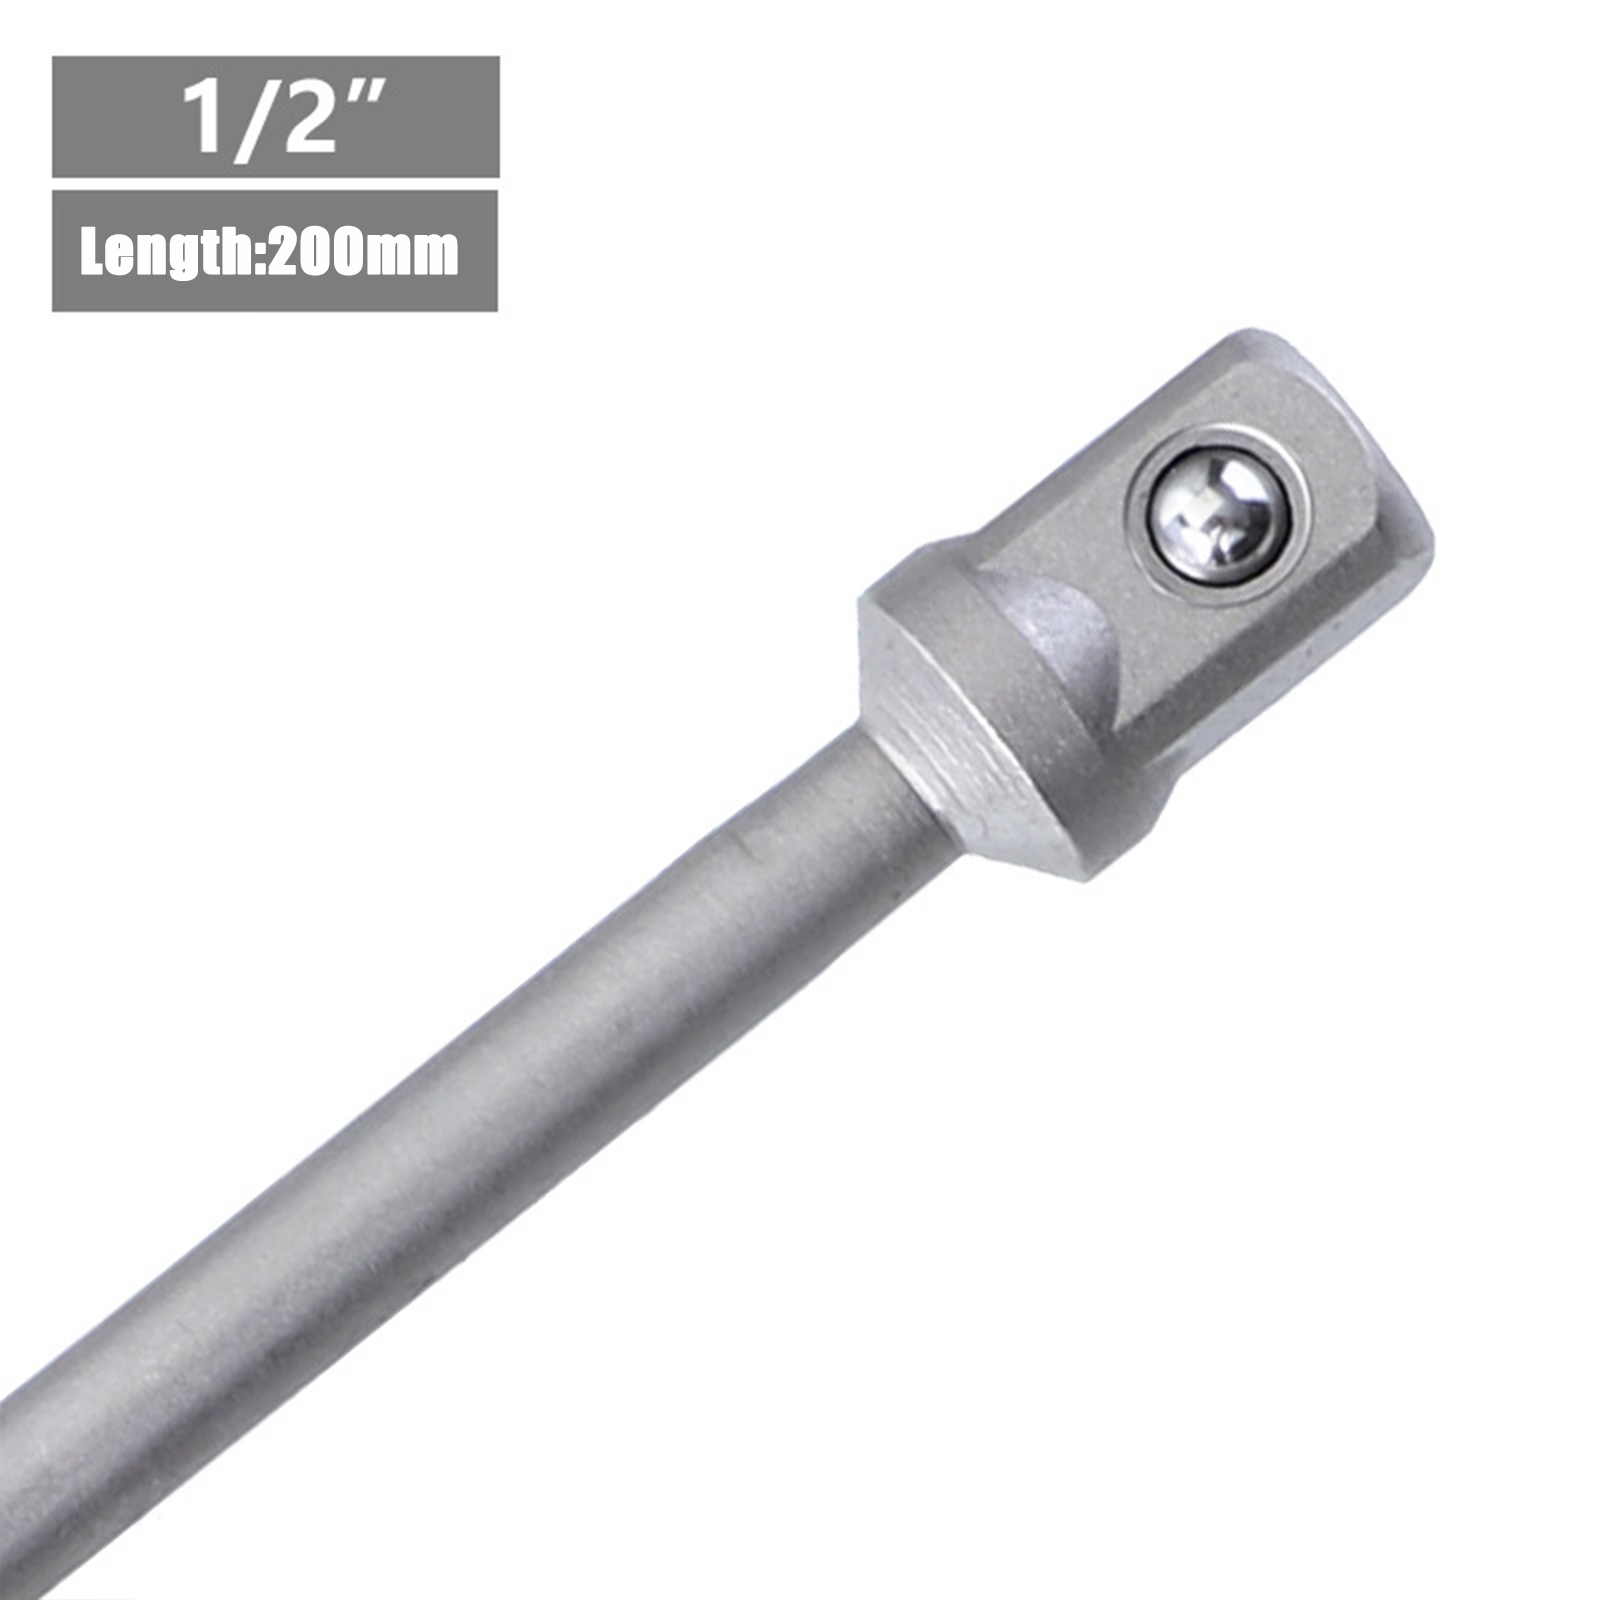 Socket Adapter Extension Hexagonal Shank to Square Socket Electric Wrench